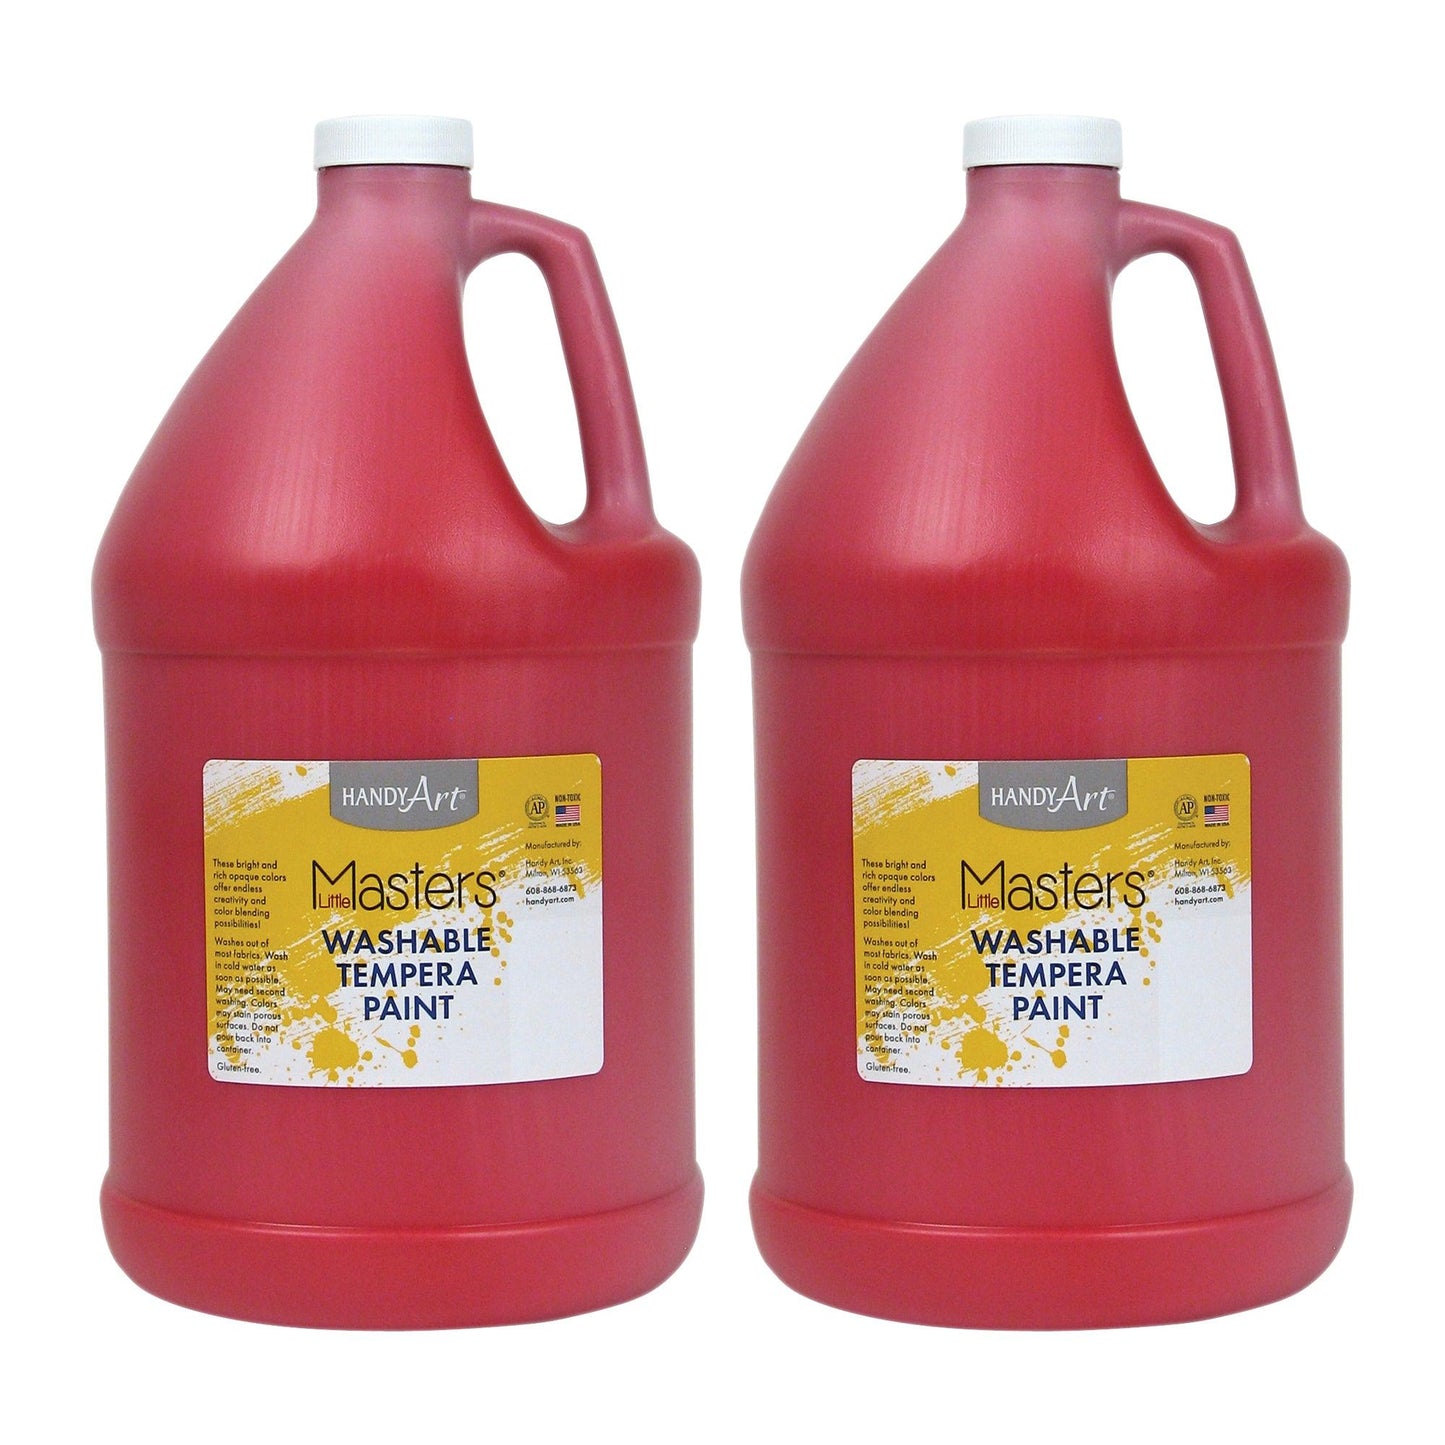 Little Masters® Washable Tempera Paint, Red, Gallon, Pack of 2 - Loomini